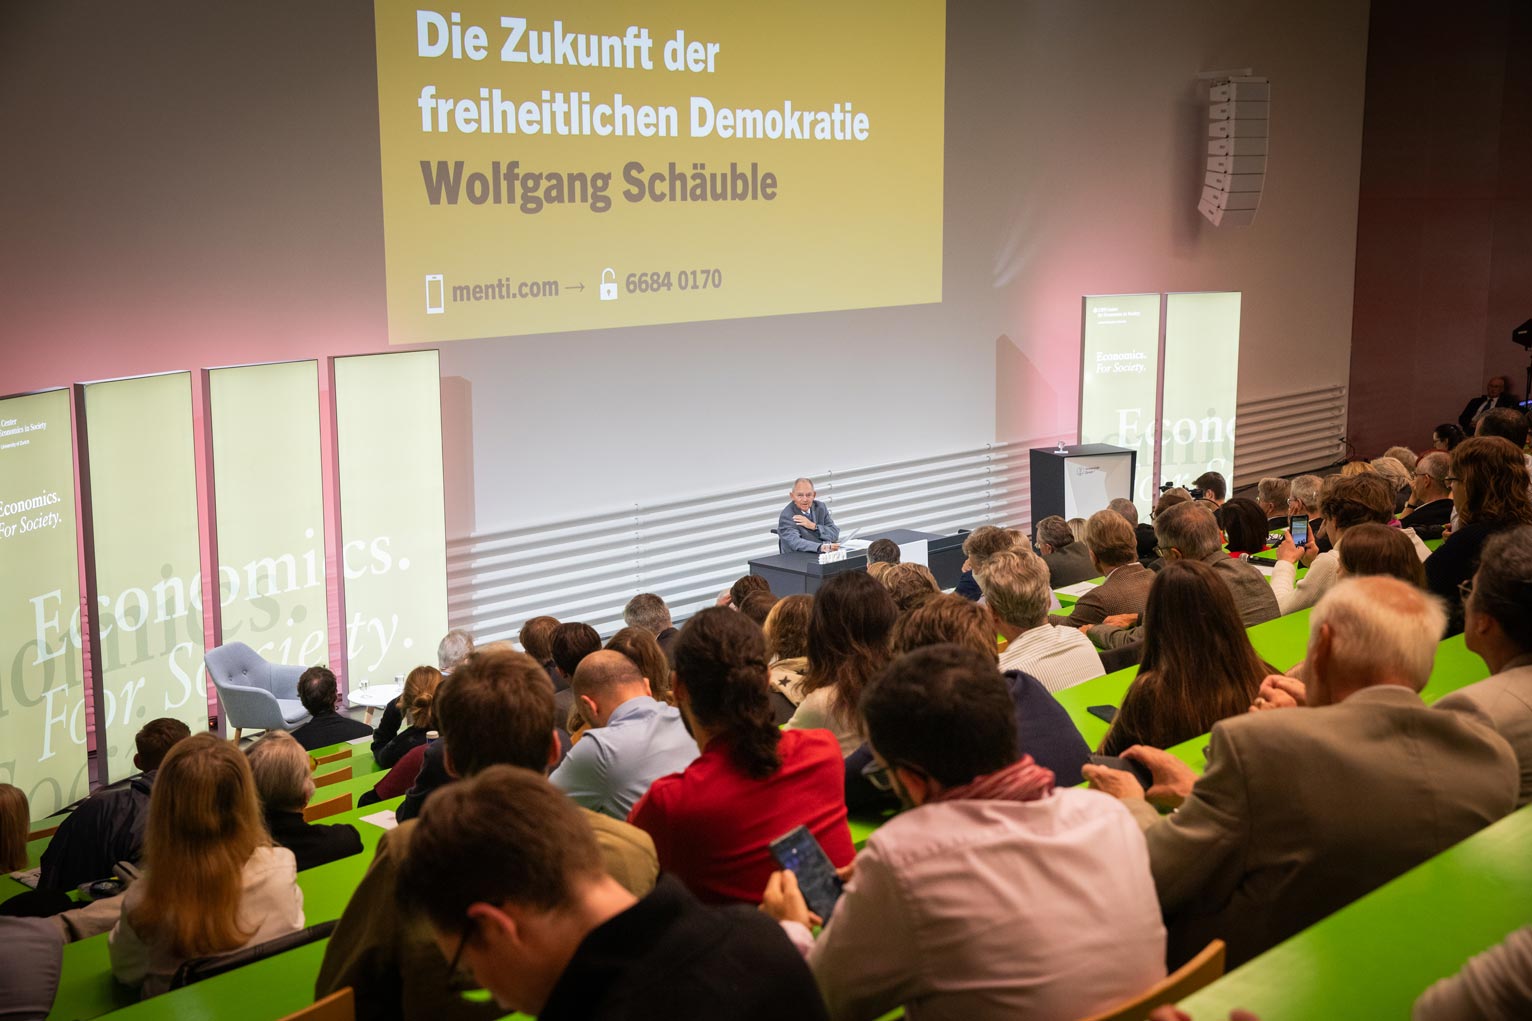 Dr. Wolfgang Schäuble at the UBS Center Opinion on 24 October 2023